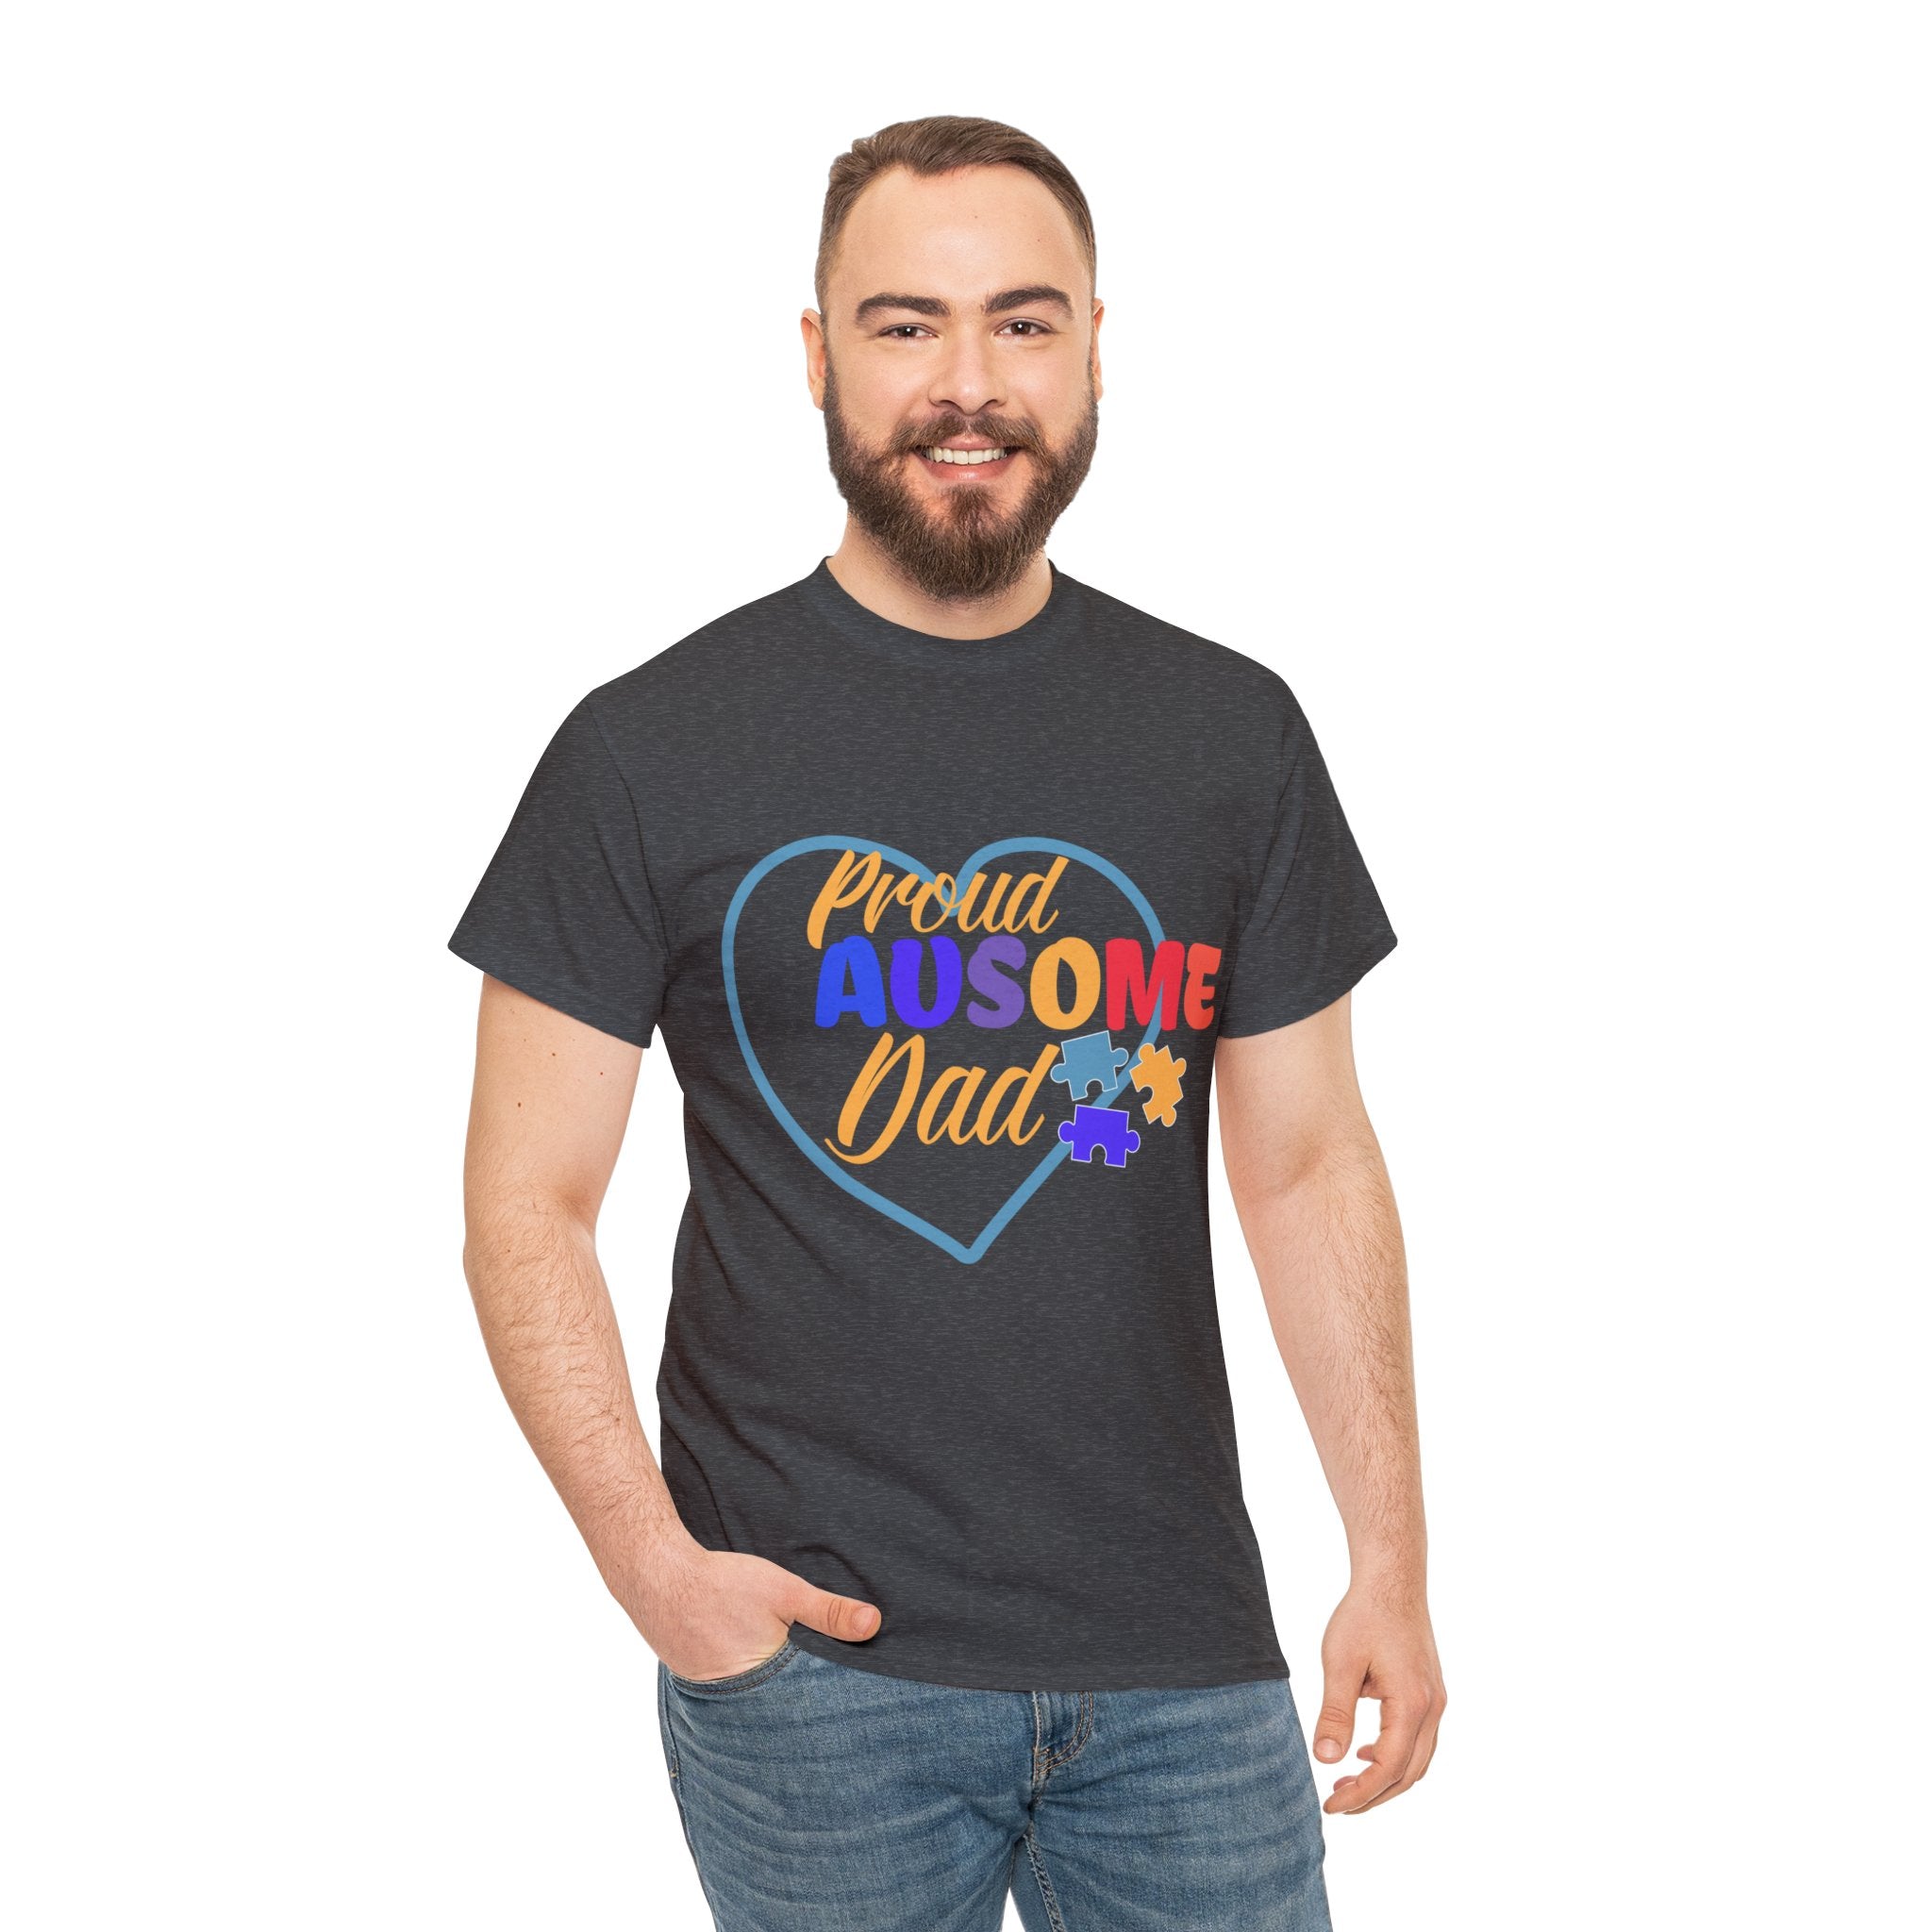 describes a product called "Ausome Dad: Champion of Neurodiversity & Autism Awareness," which is a unisex heavy cotton tee. The product aims to celebrate and honor fathers who support and advocate for their neurodiverse children, specifically within the autism community.